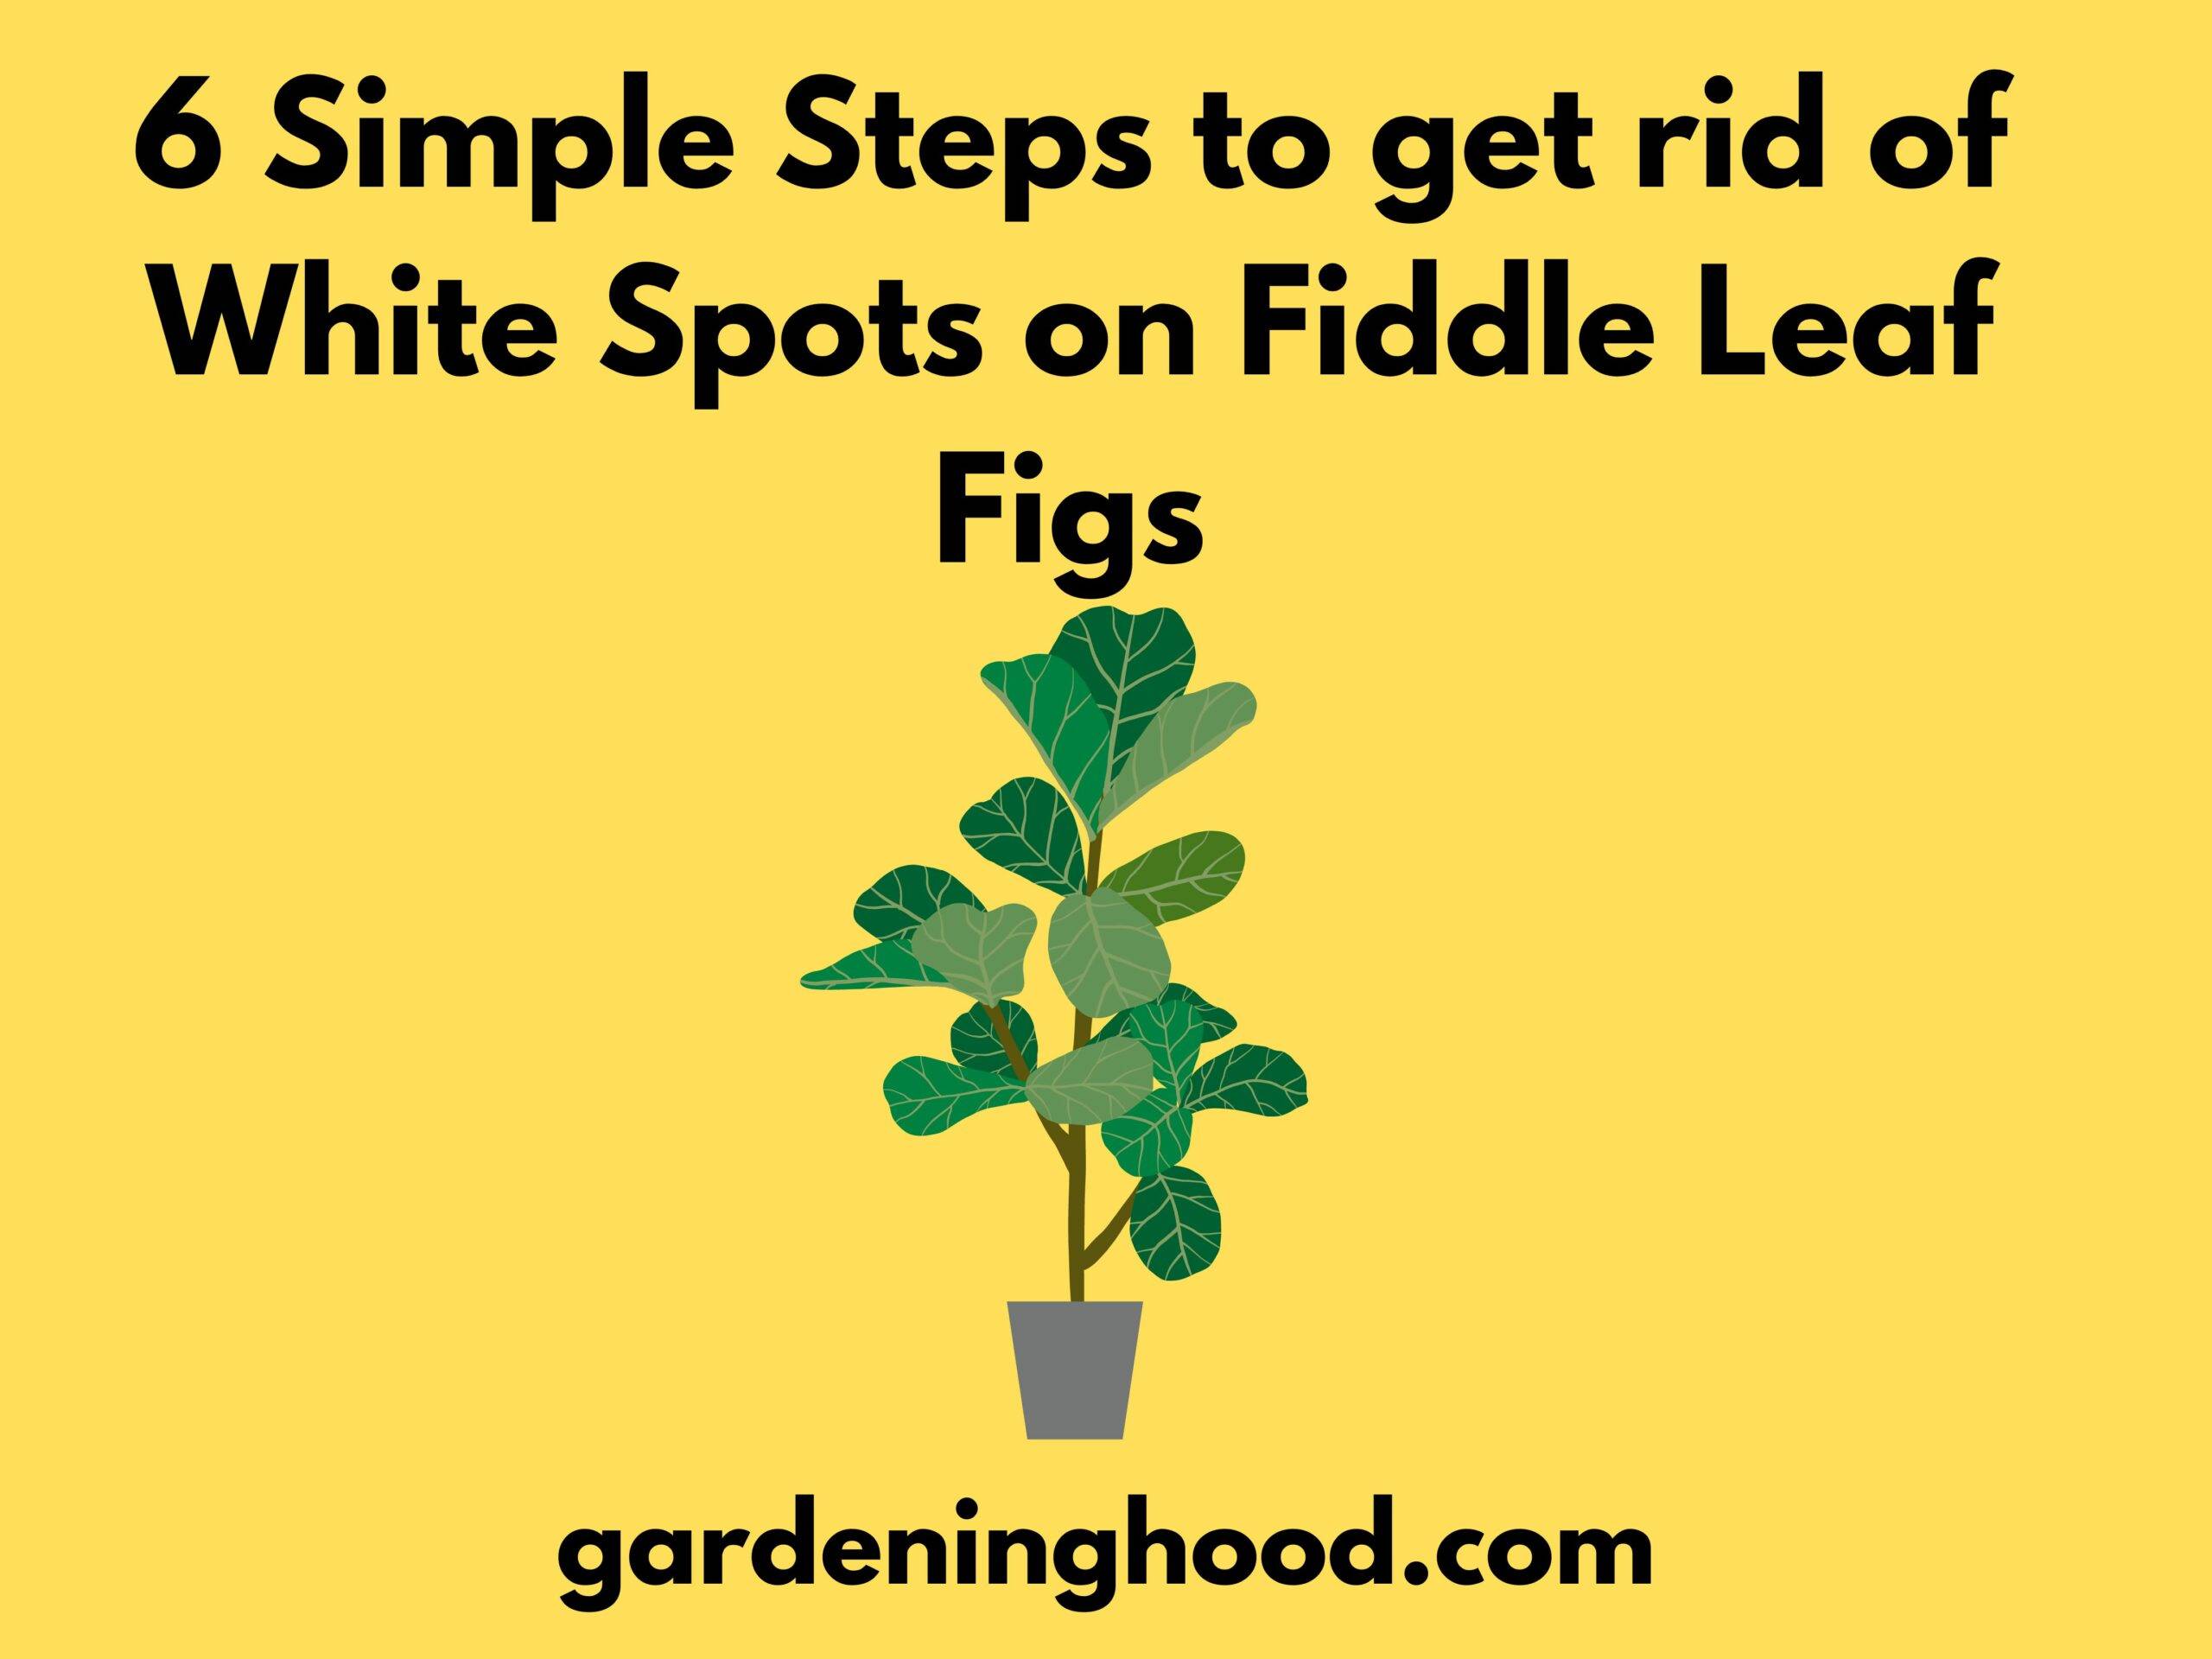 6 Simple Steps to get rid of White Spots on Fiddle Leaf Figs